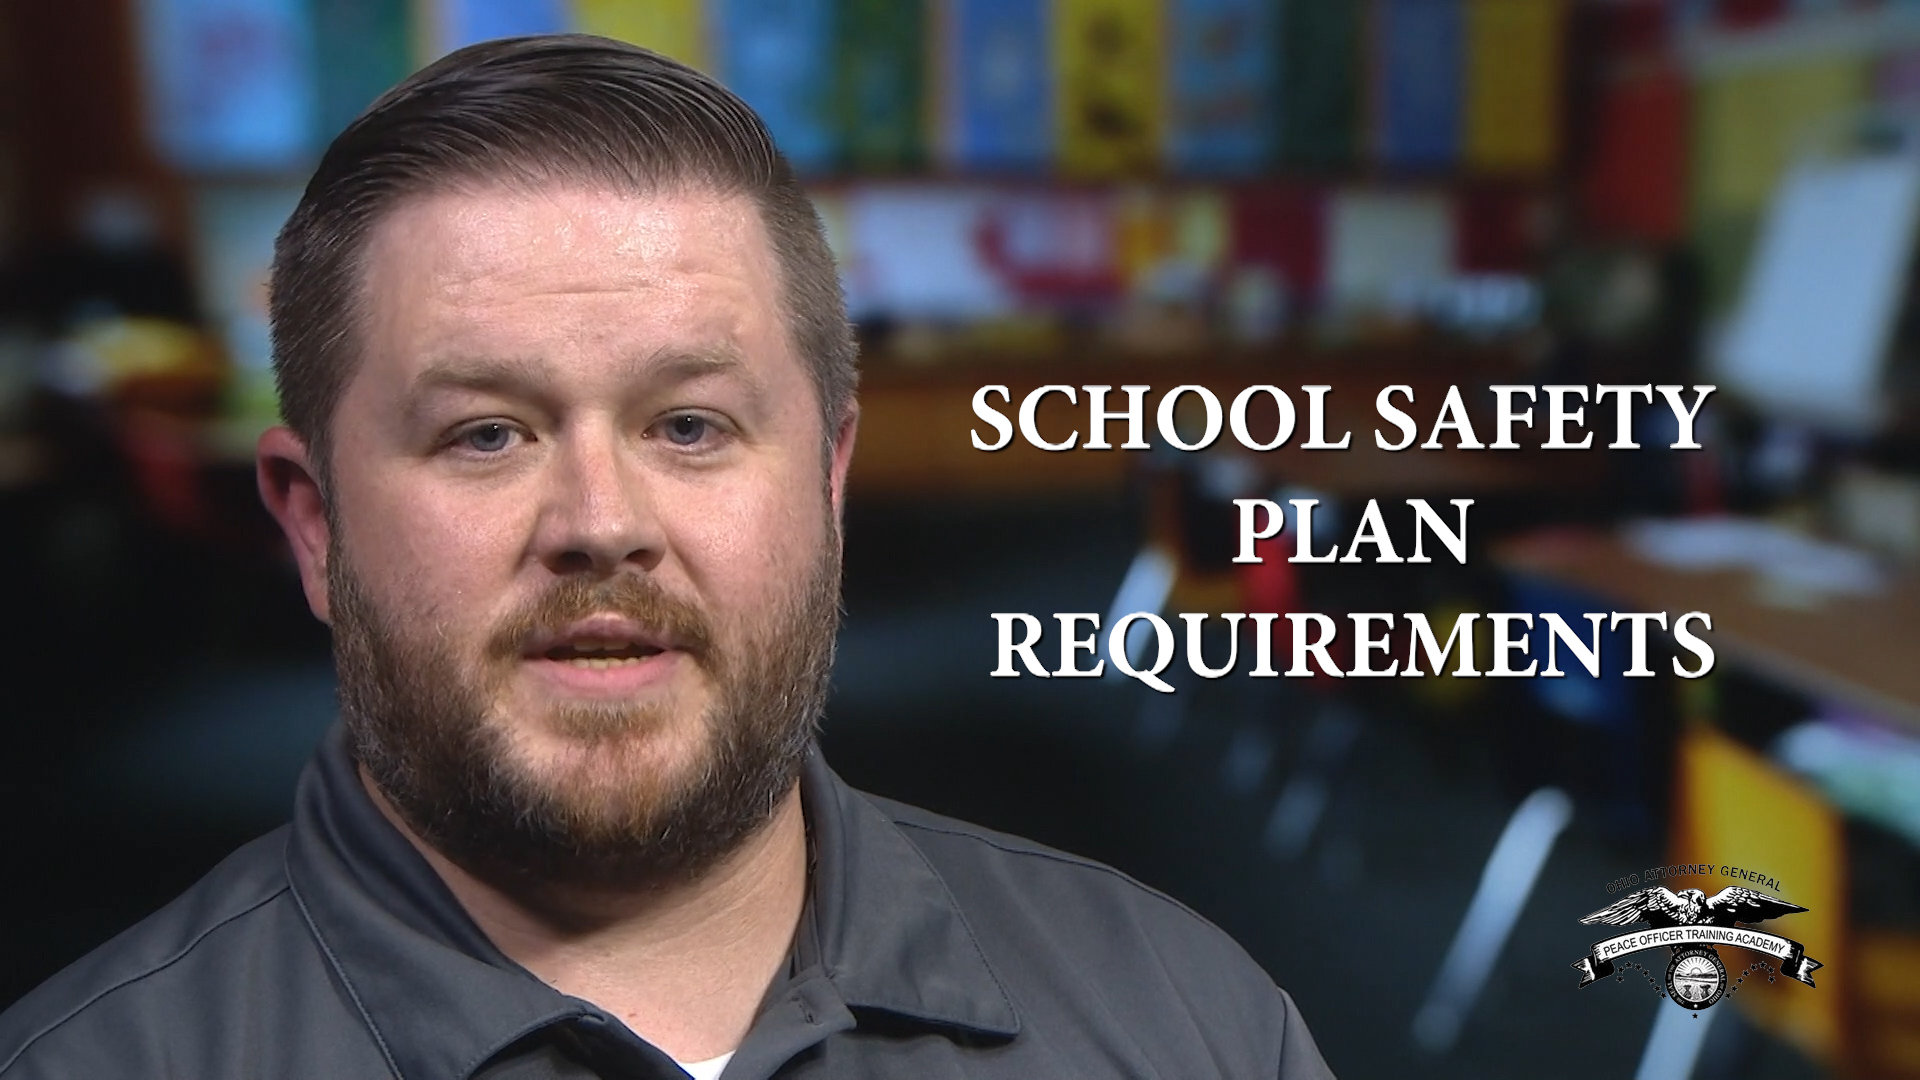 Video 21: School Safety Plan Requirements